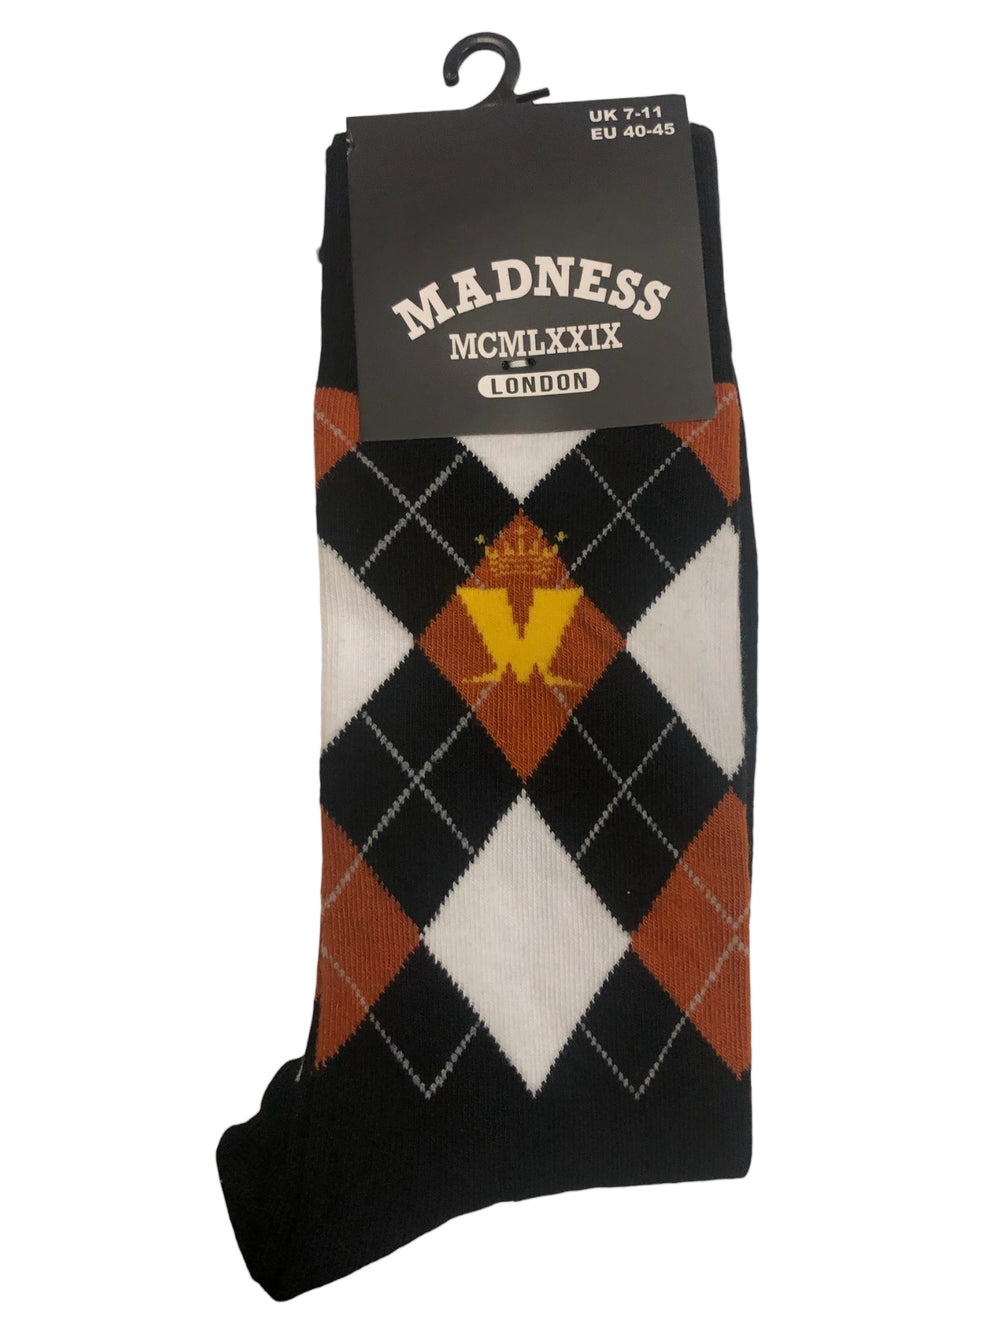 Madness - Crown & Brown Diamond   Pattern Official Product 1 Pair Jacquard Socks Brand New